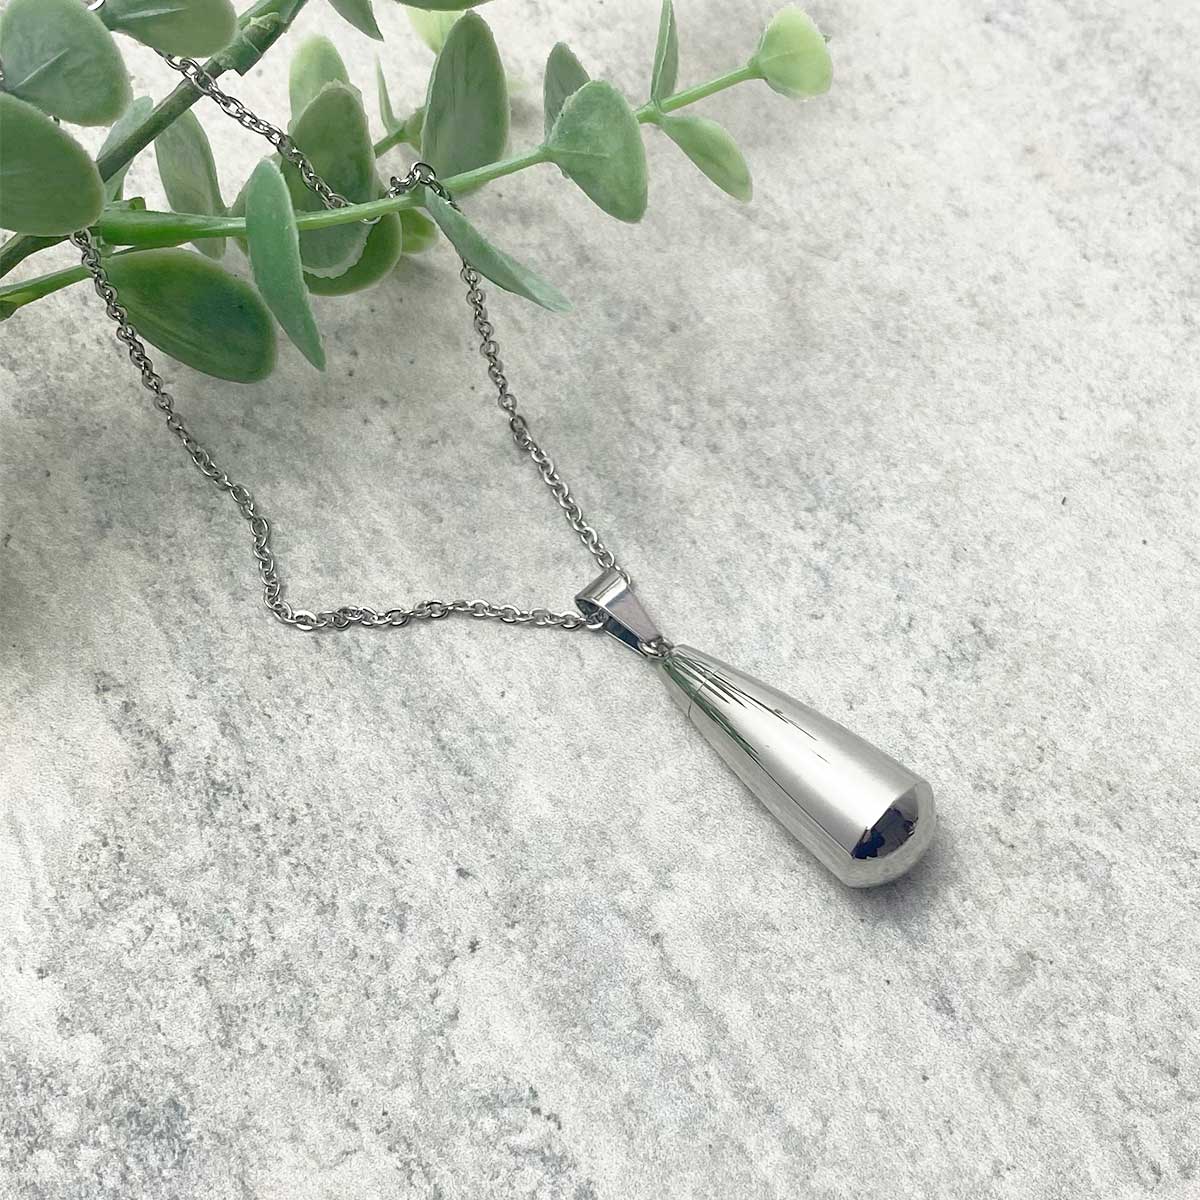 Engraved Teardrop Glass and Steel Urn Necklace for Human Ashes w/ Opal –  Ashley Lozano Jewelry